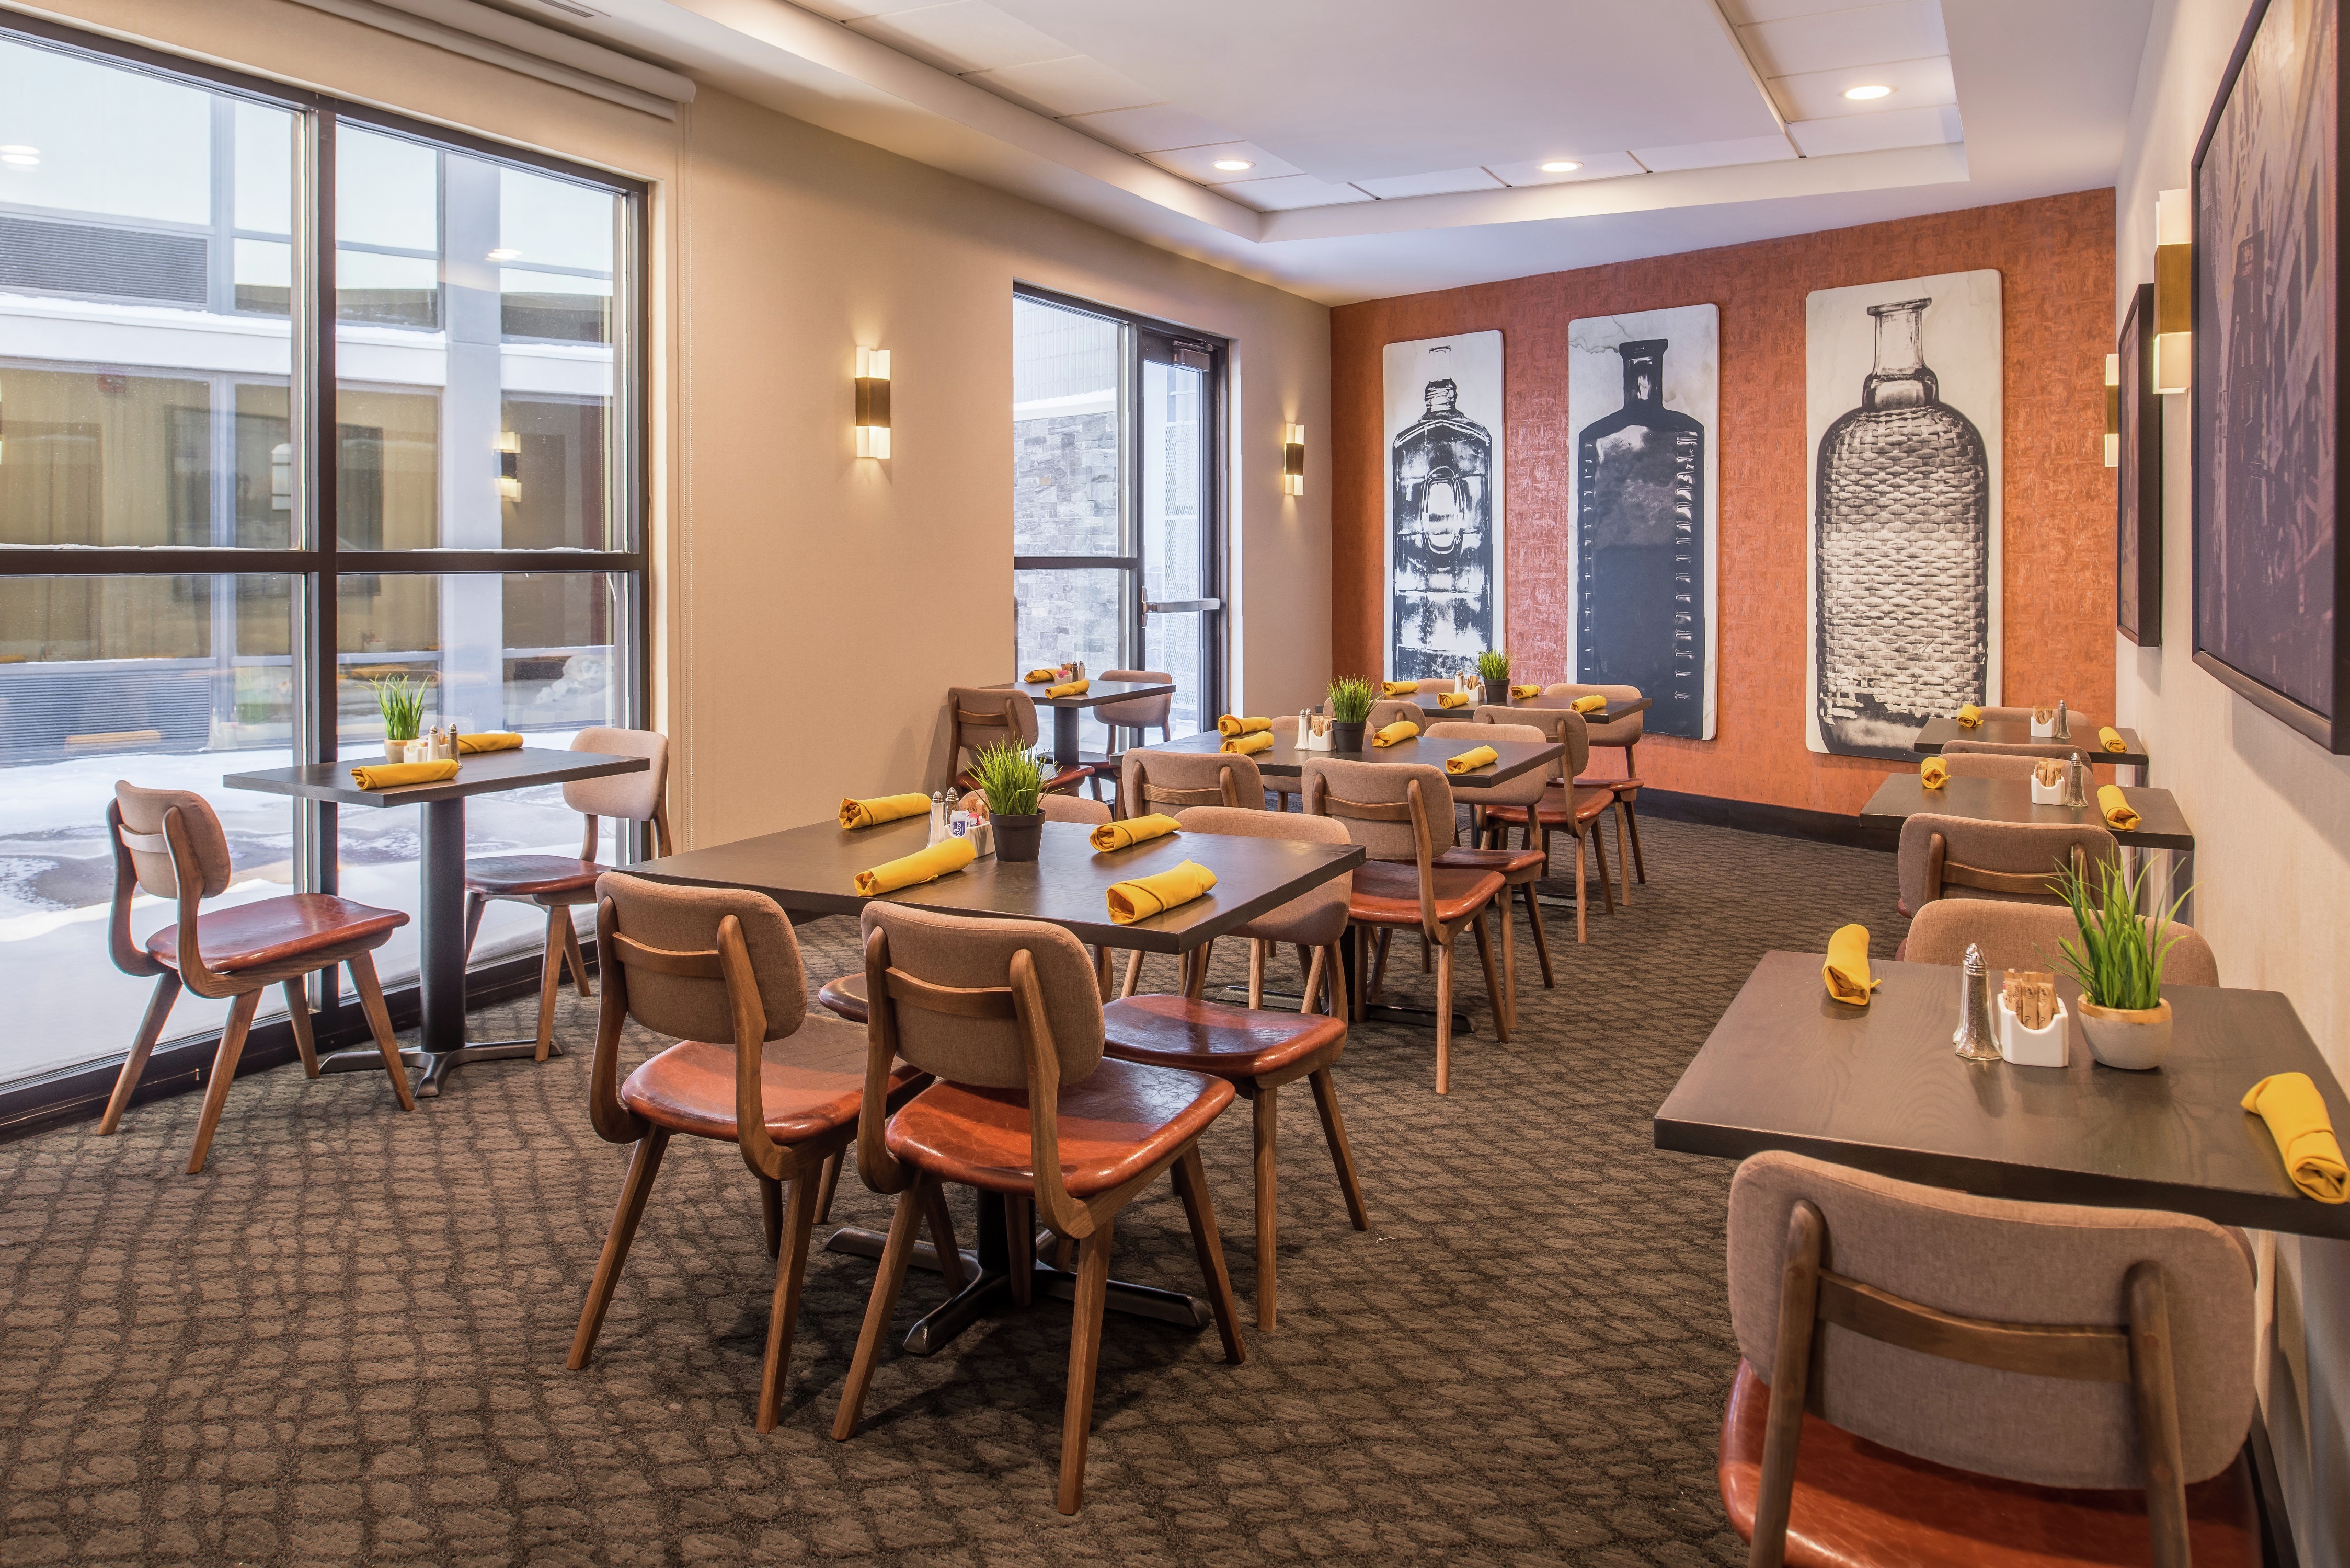 Private Dining Room in Made Market Restaurant With Large Windows, Wall Art, Tables, and Chairs